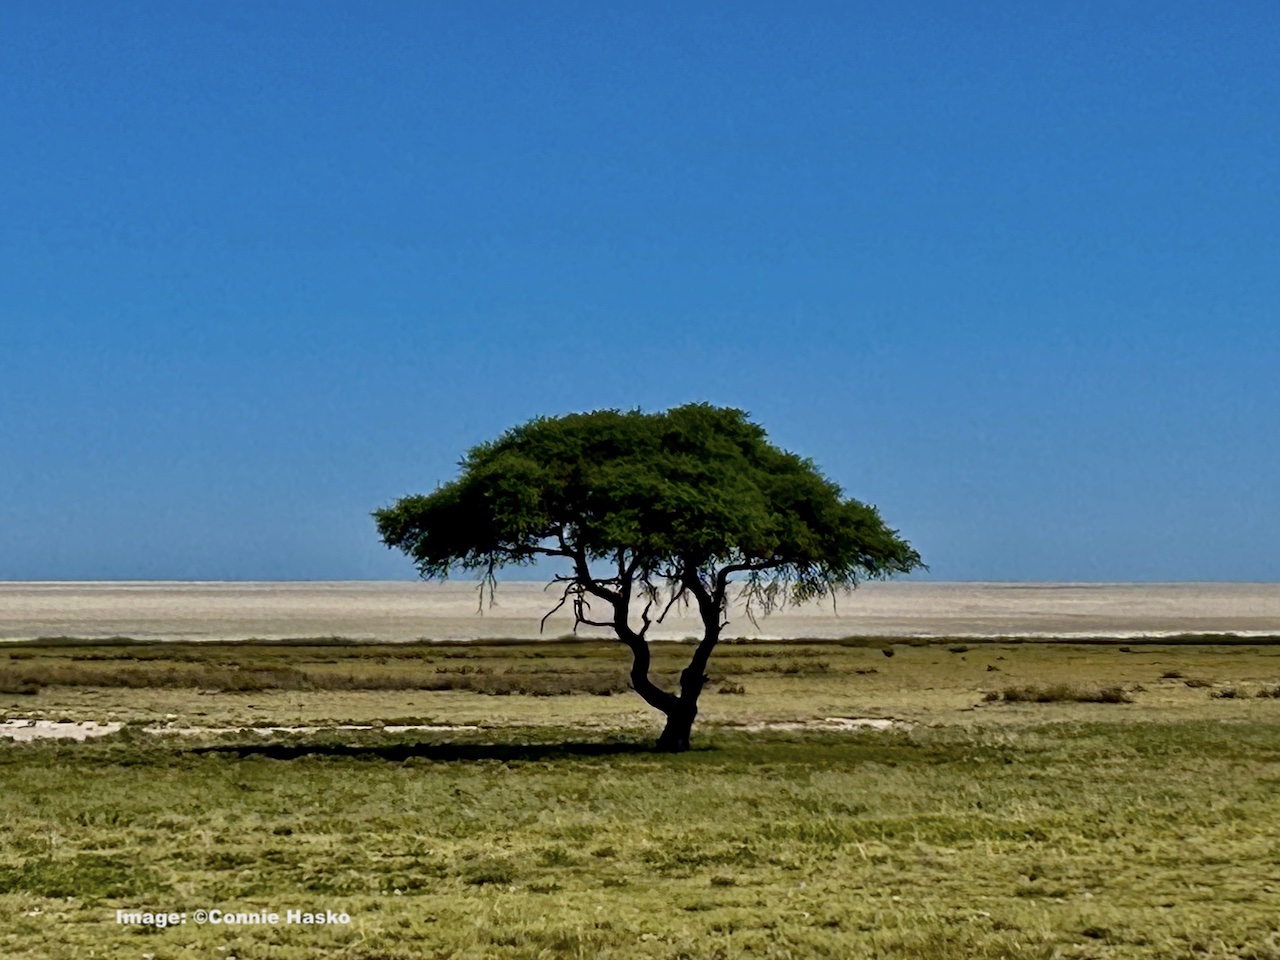 Etosha National Park, famous for its ancient salt pan, is home to a myriad an amazing ecosystem of plants, animals and birds. Image Connie Hasko 